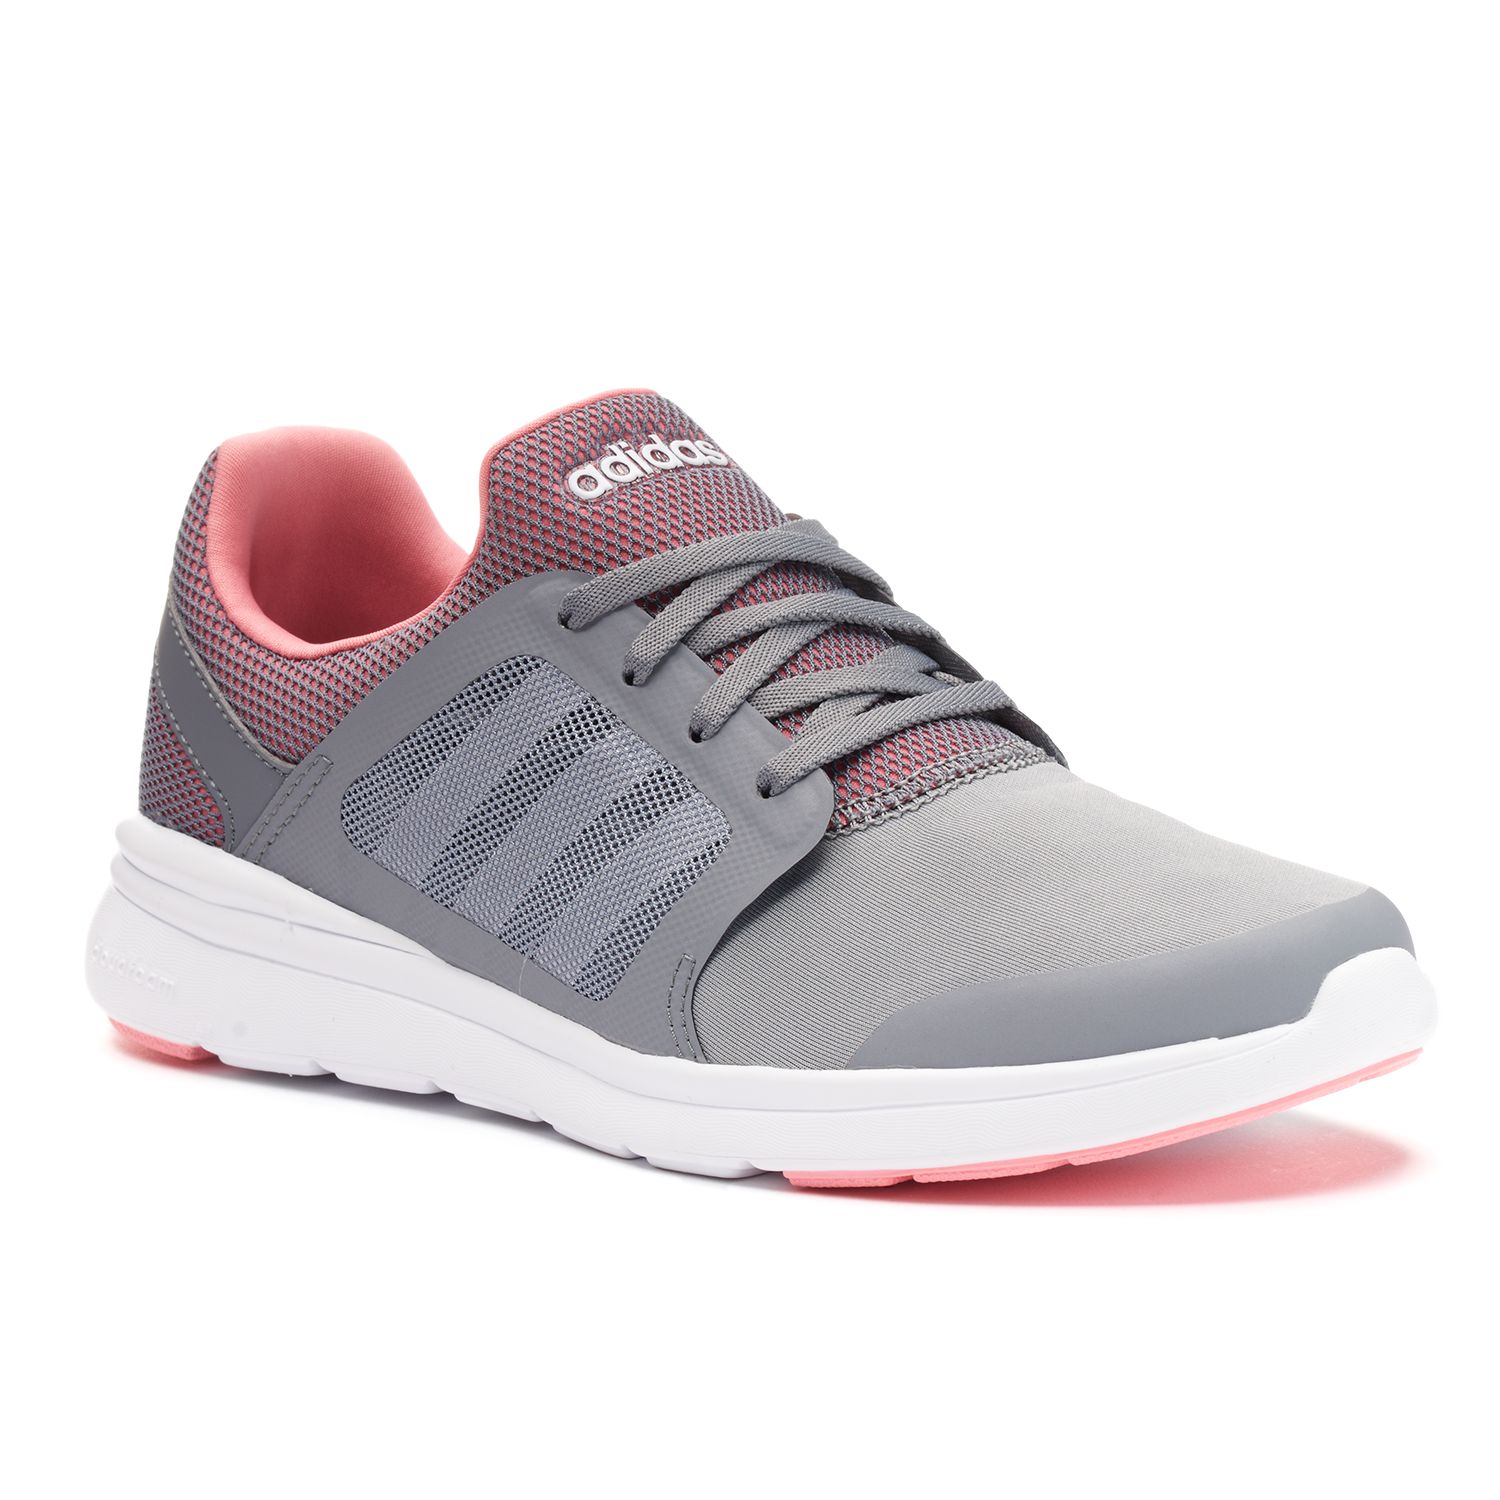 adidas neo xpression women's shoes